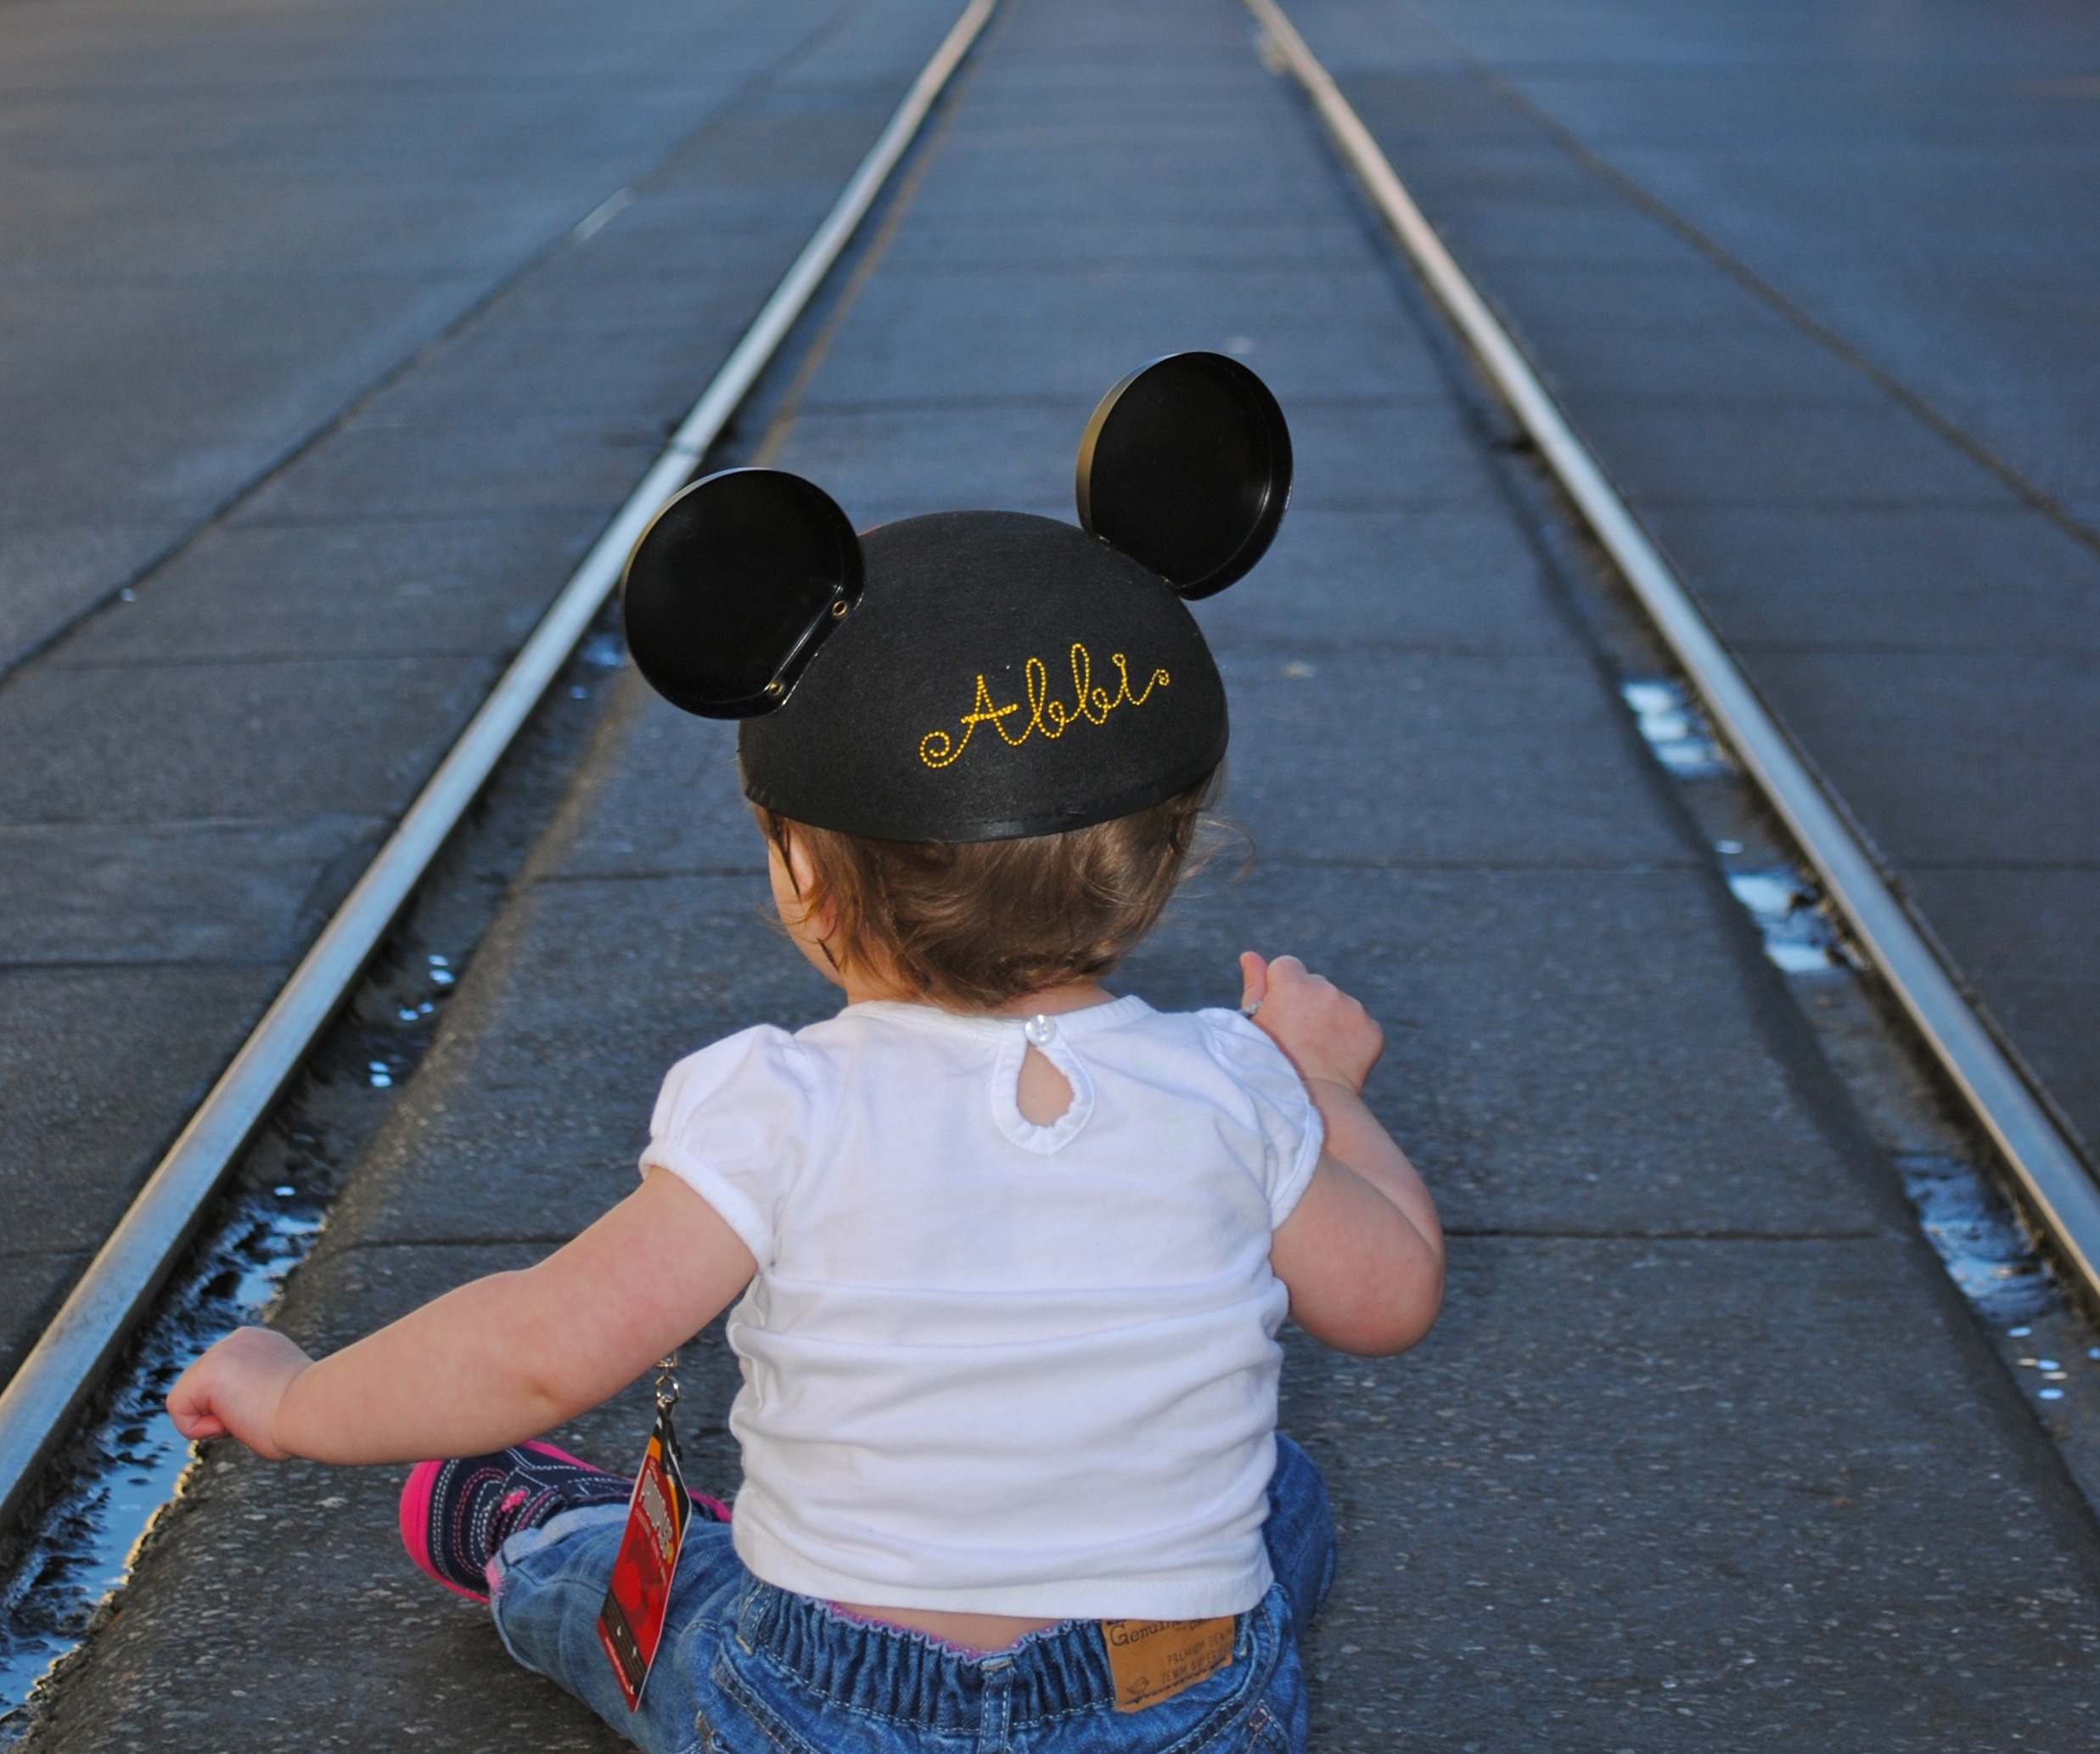 Three Less Common Tips for Traveling to Walt Disney World with Kids